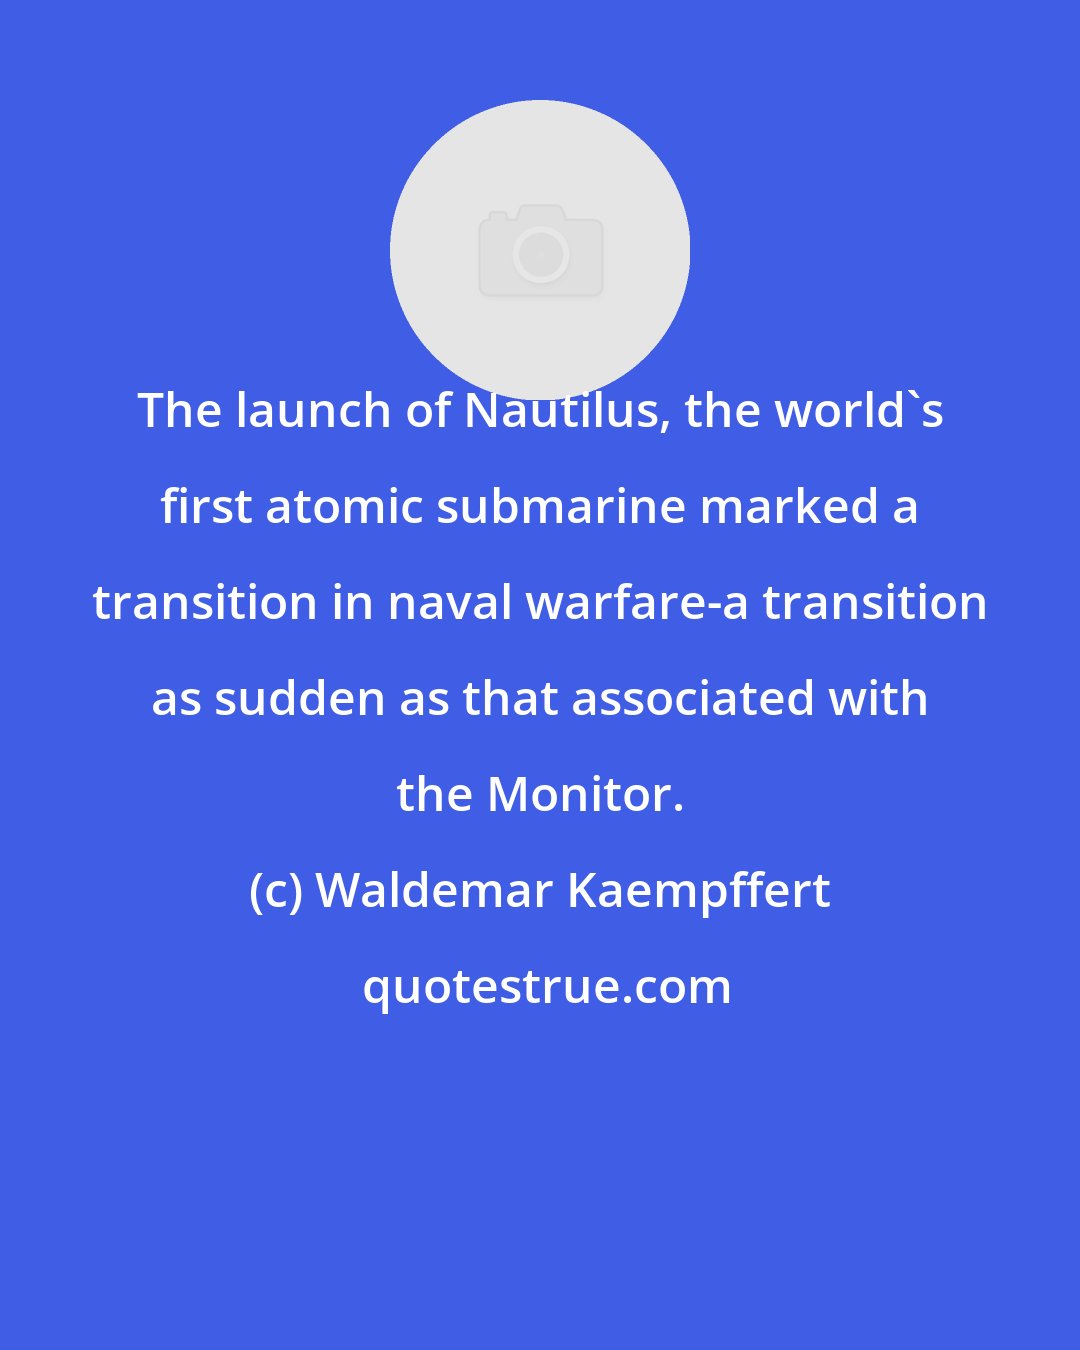 Waldemar Kaempffert: The launch of Nautilus, the world's first atomic submarine marked a transition in naval warfare-a transition as sudden as that associated with the Monitor.